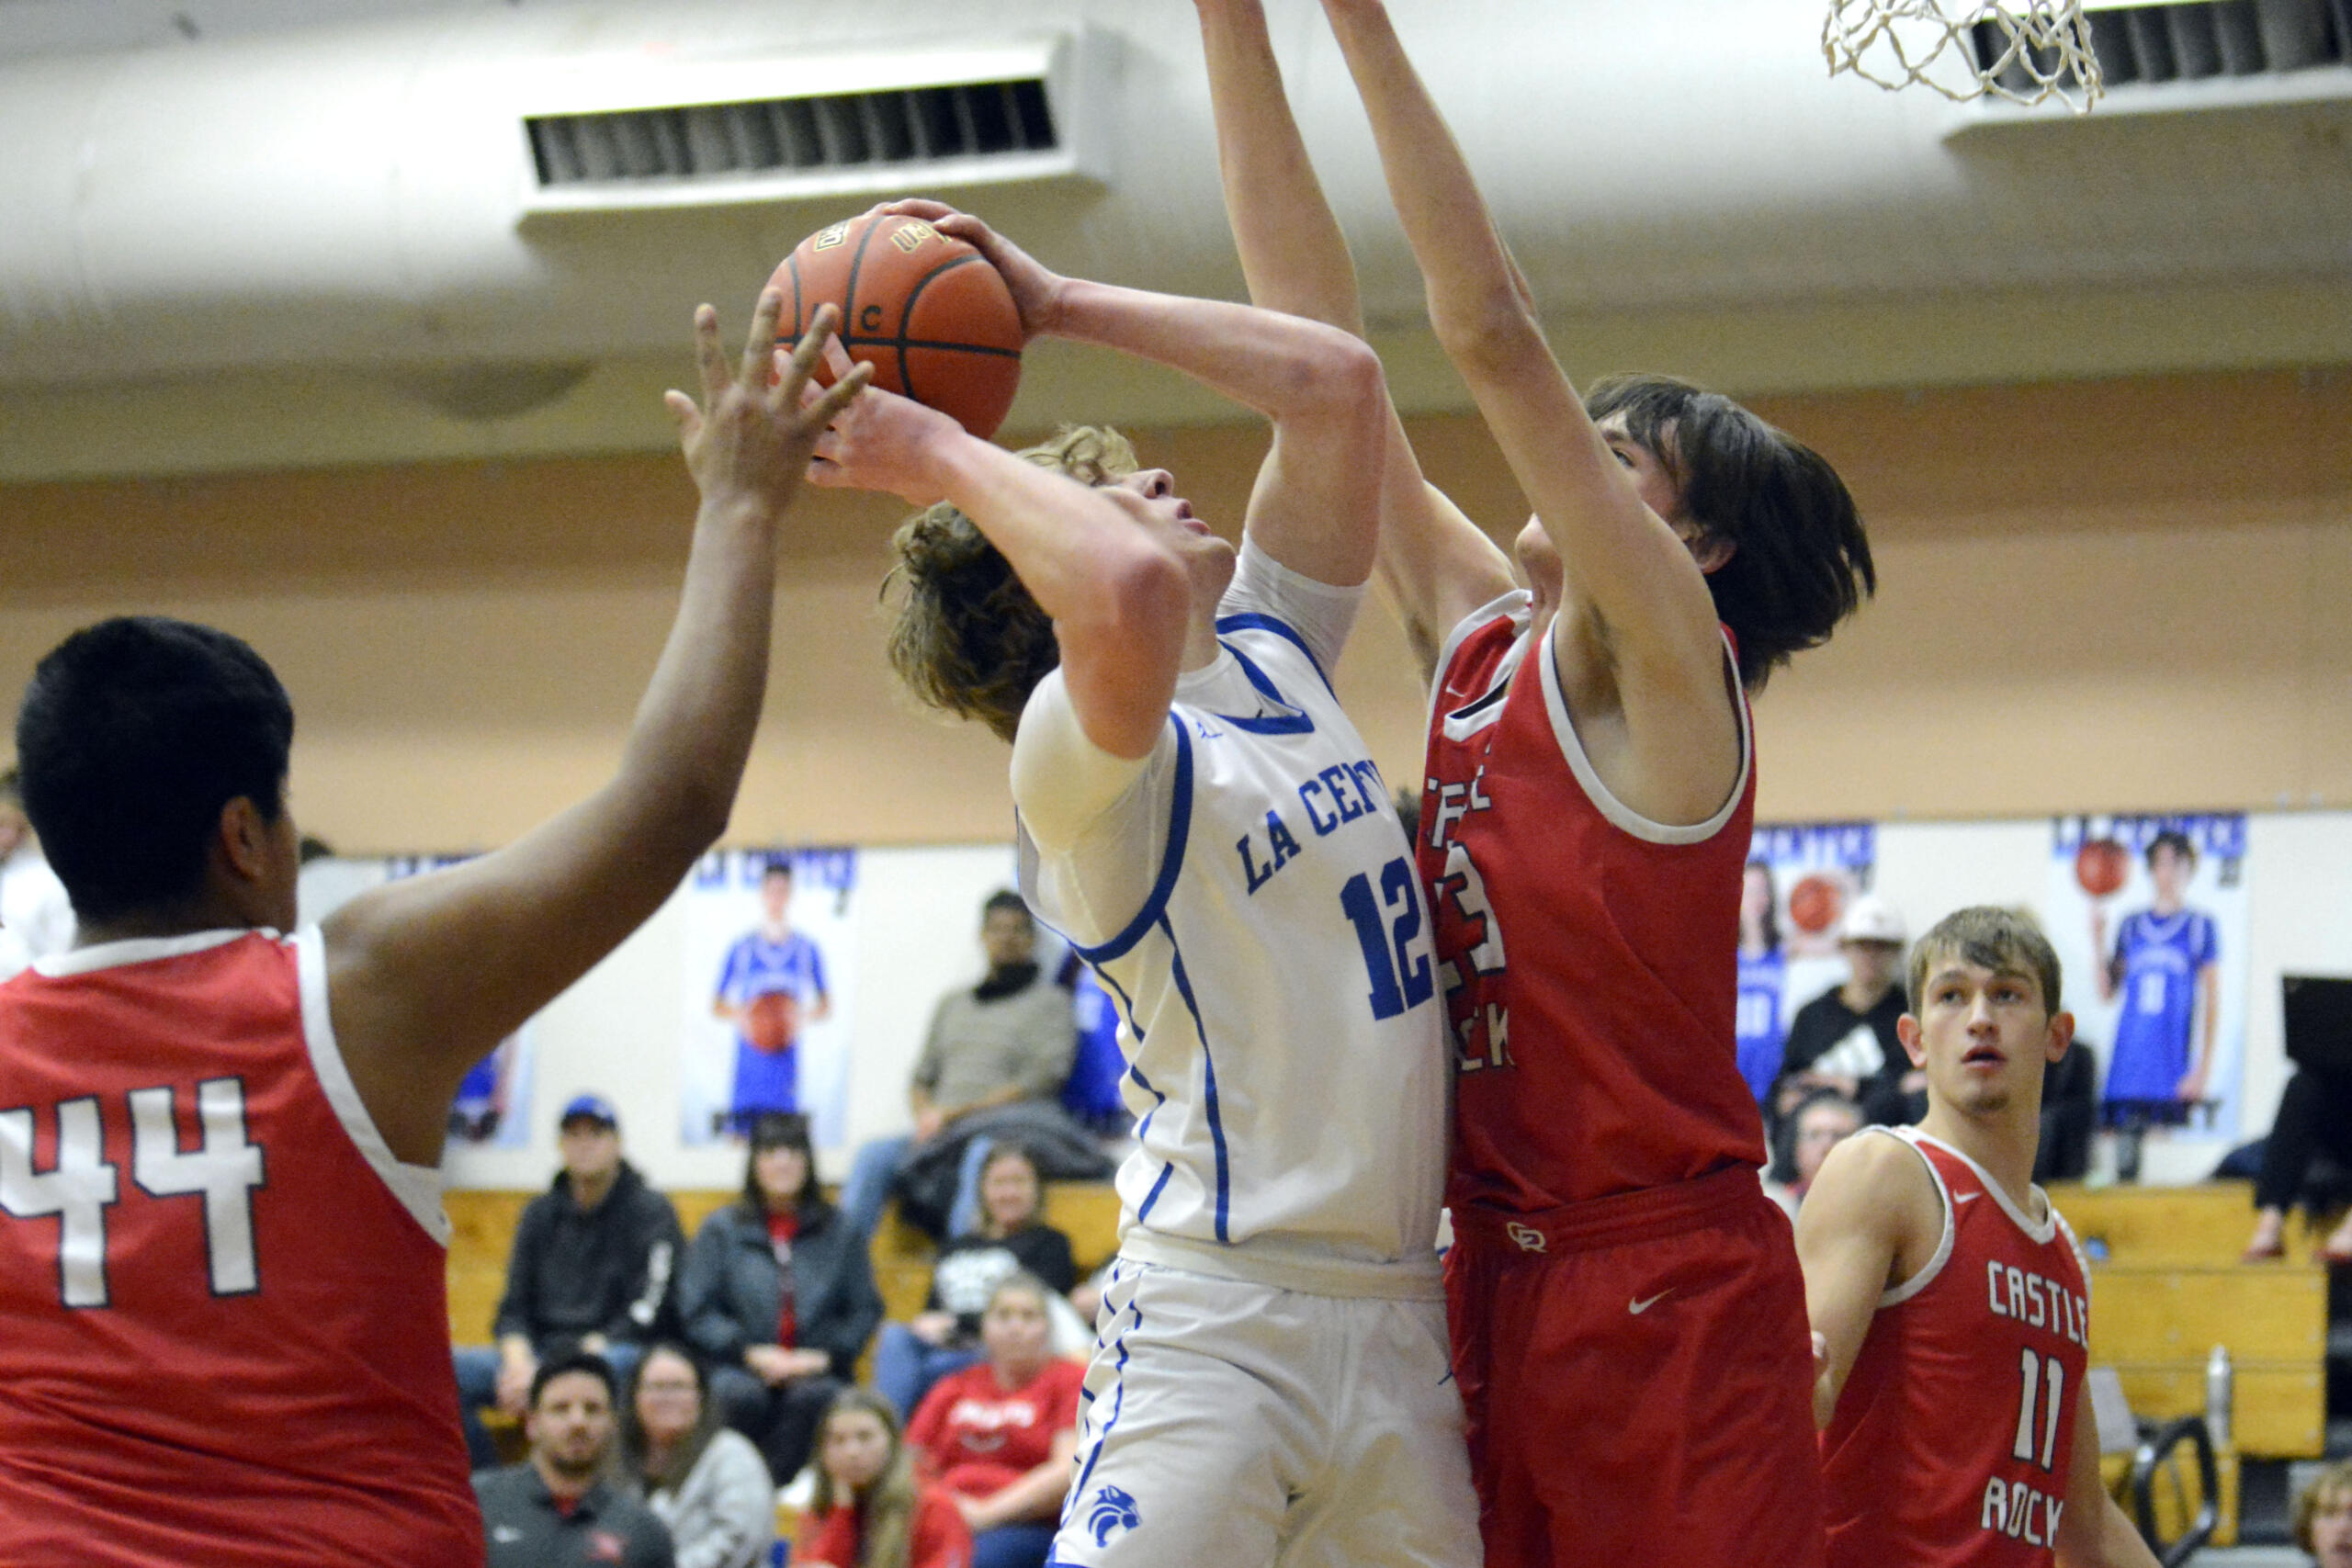 La Center’s Austin Nixon (12) looks to go up for a shot over Castle Rock’s James Montgomery (23) in a Trico League boys basketball game on Wednesday, Jan. 18, 2023, at La Center High School.